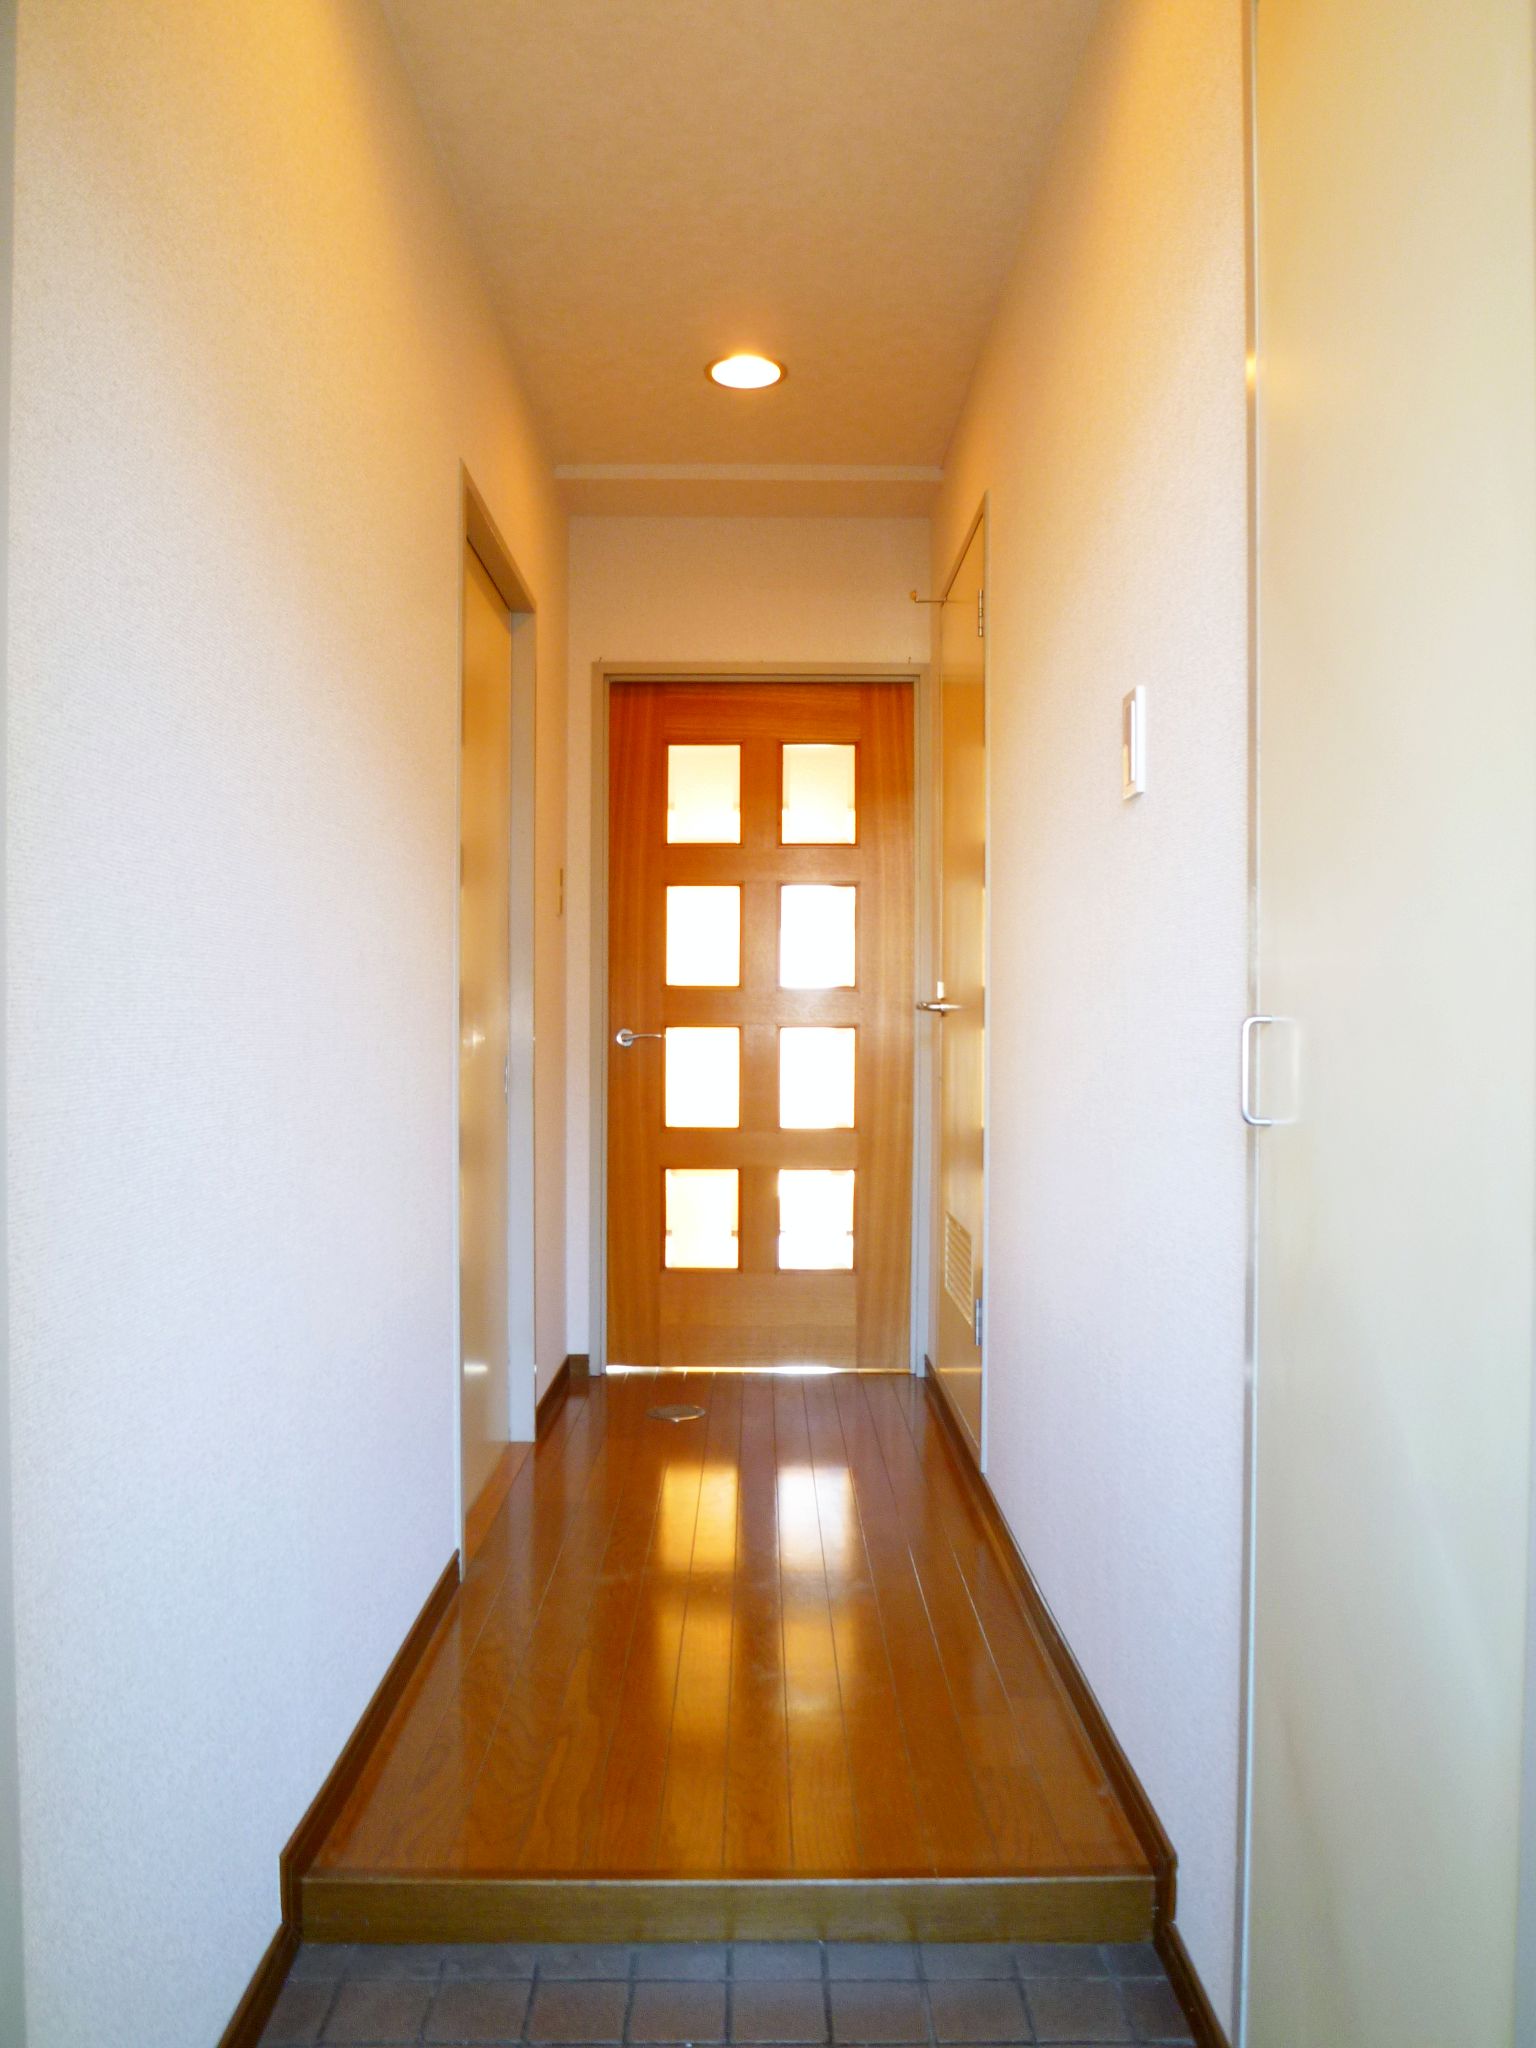 Living and room. Entrance passage